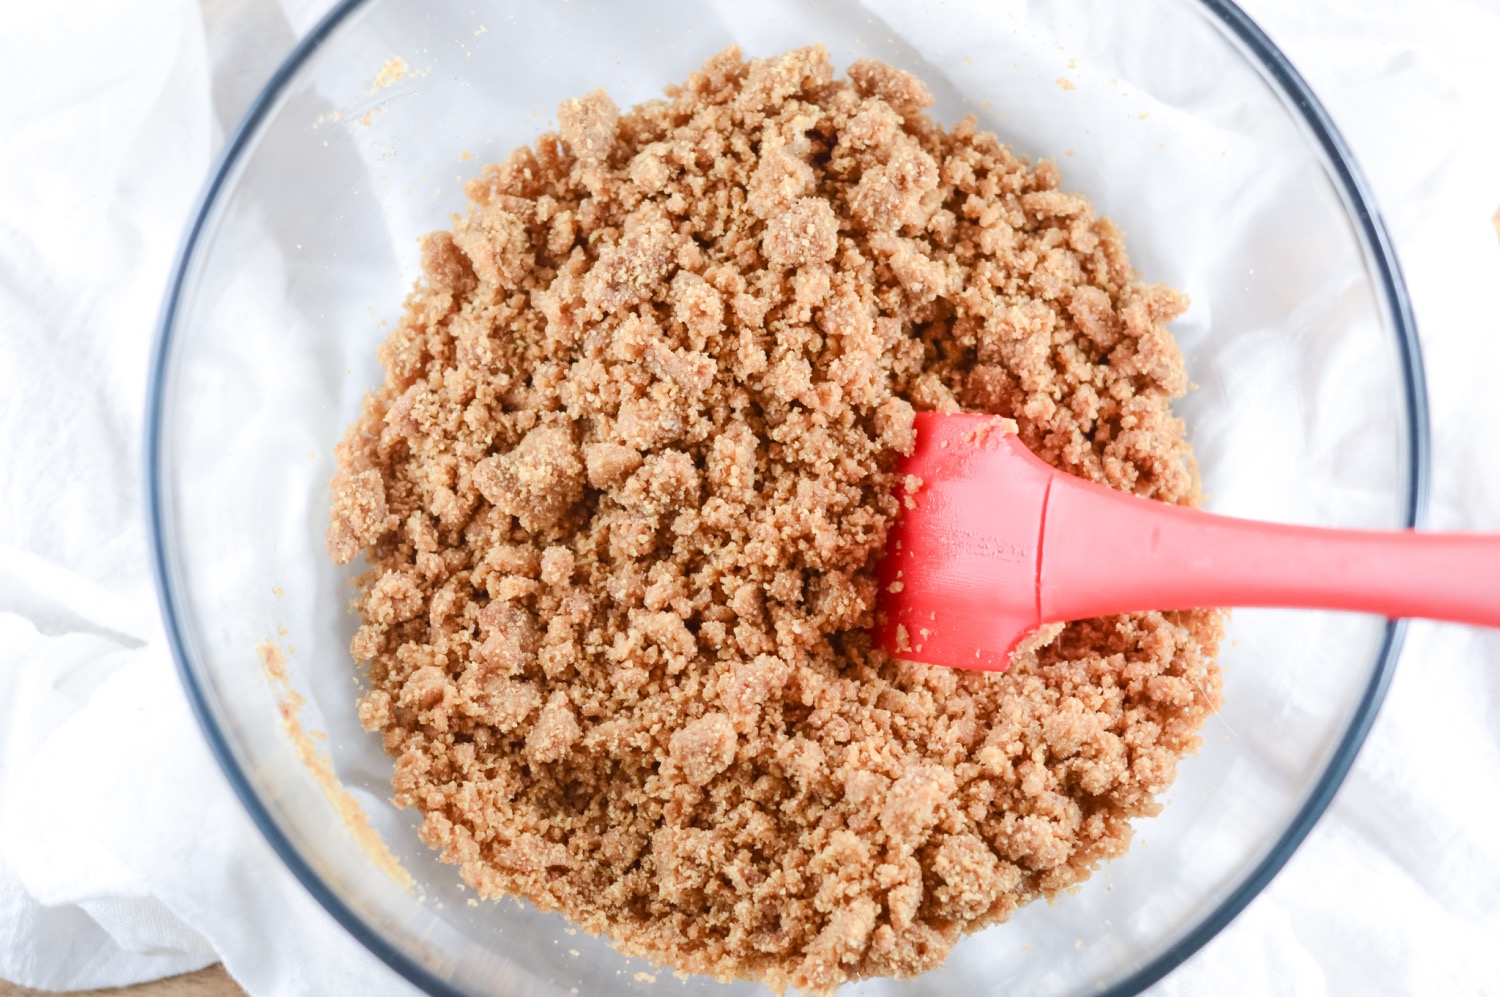 graham cracker crust ready to be placed in a pie plate